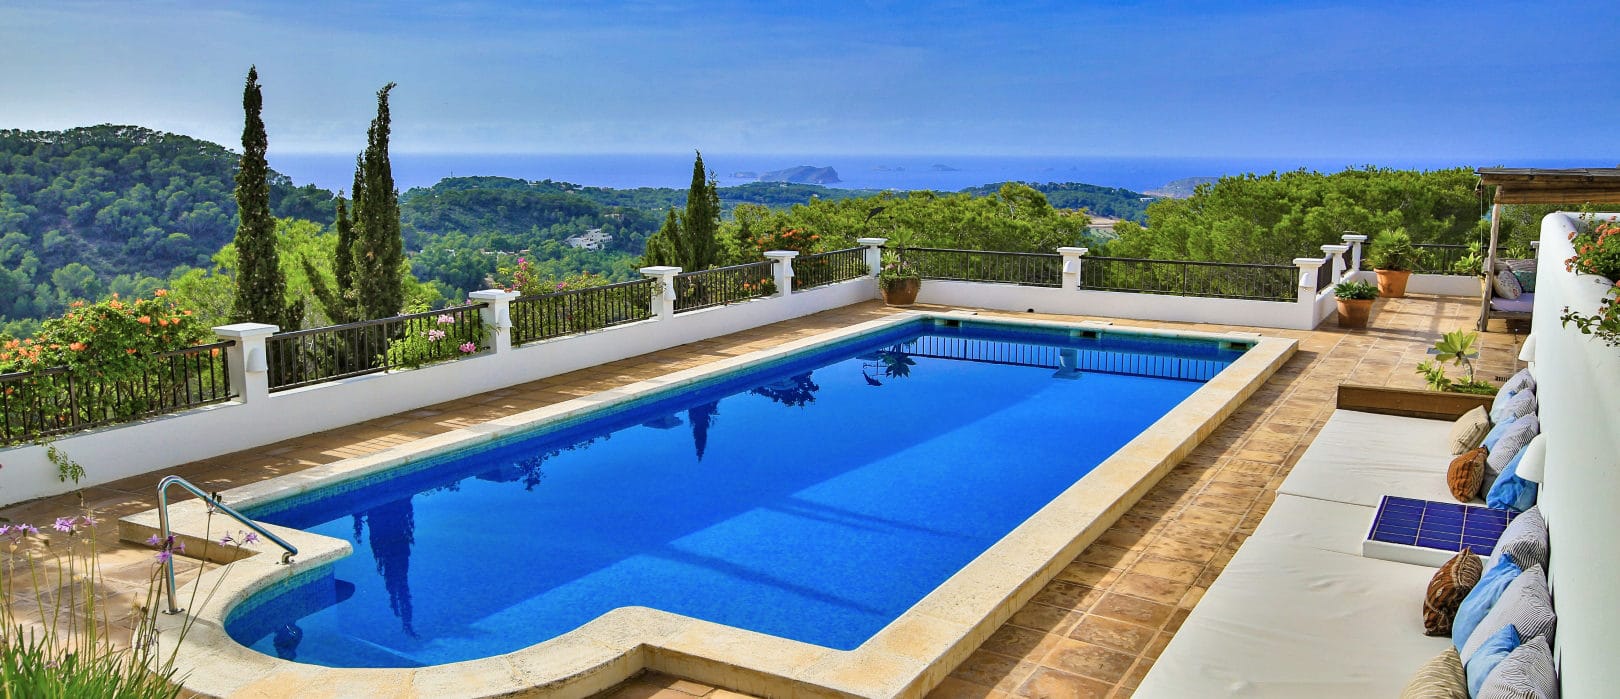 Pool on terrace with stunning view to landscape all along to the sea